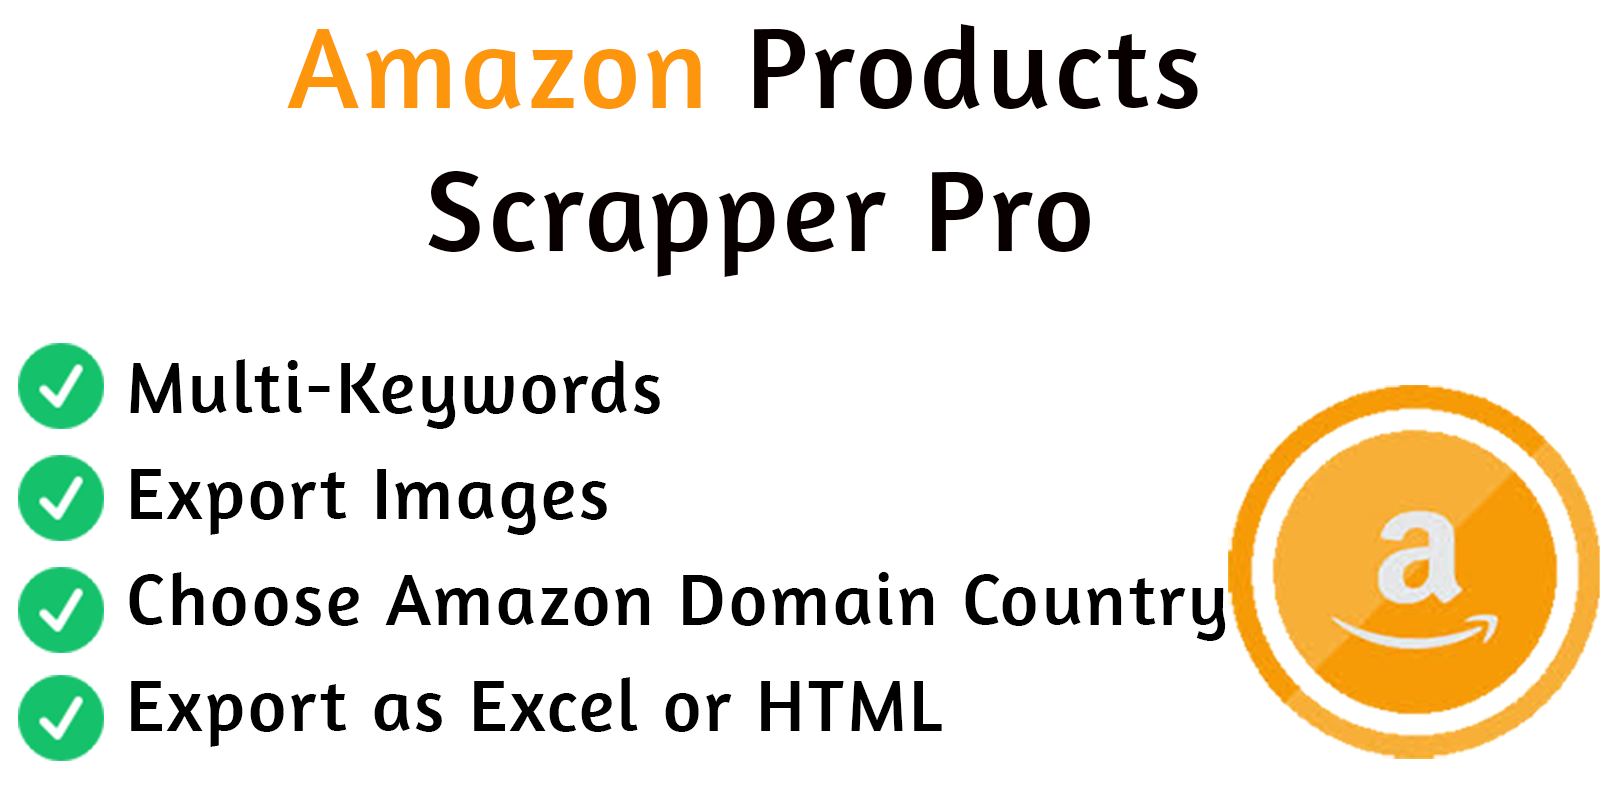 Amazon Products Scrapper with multi-keywords